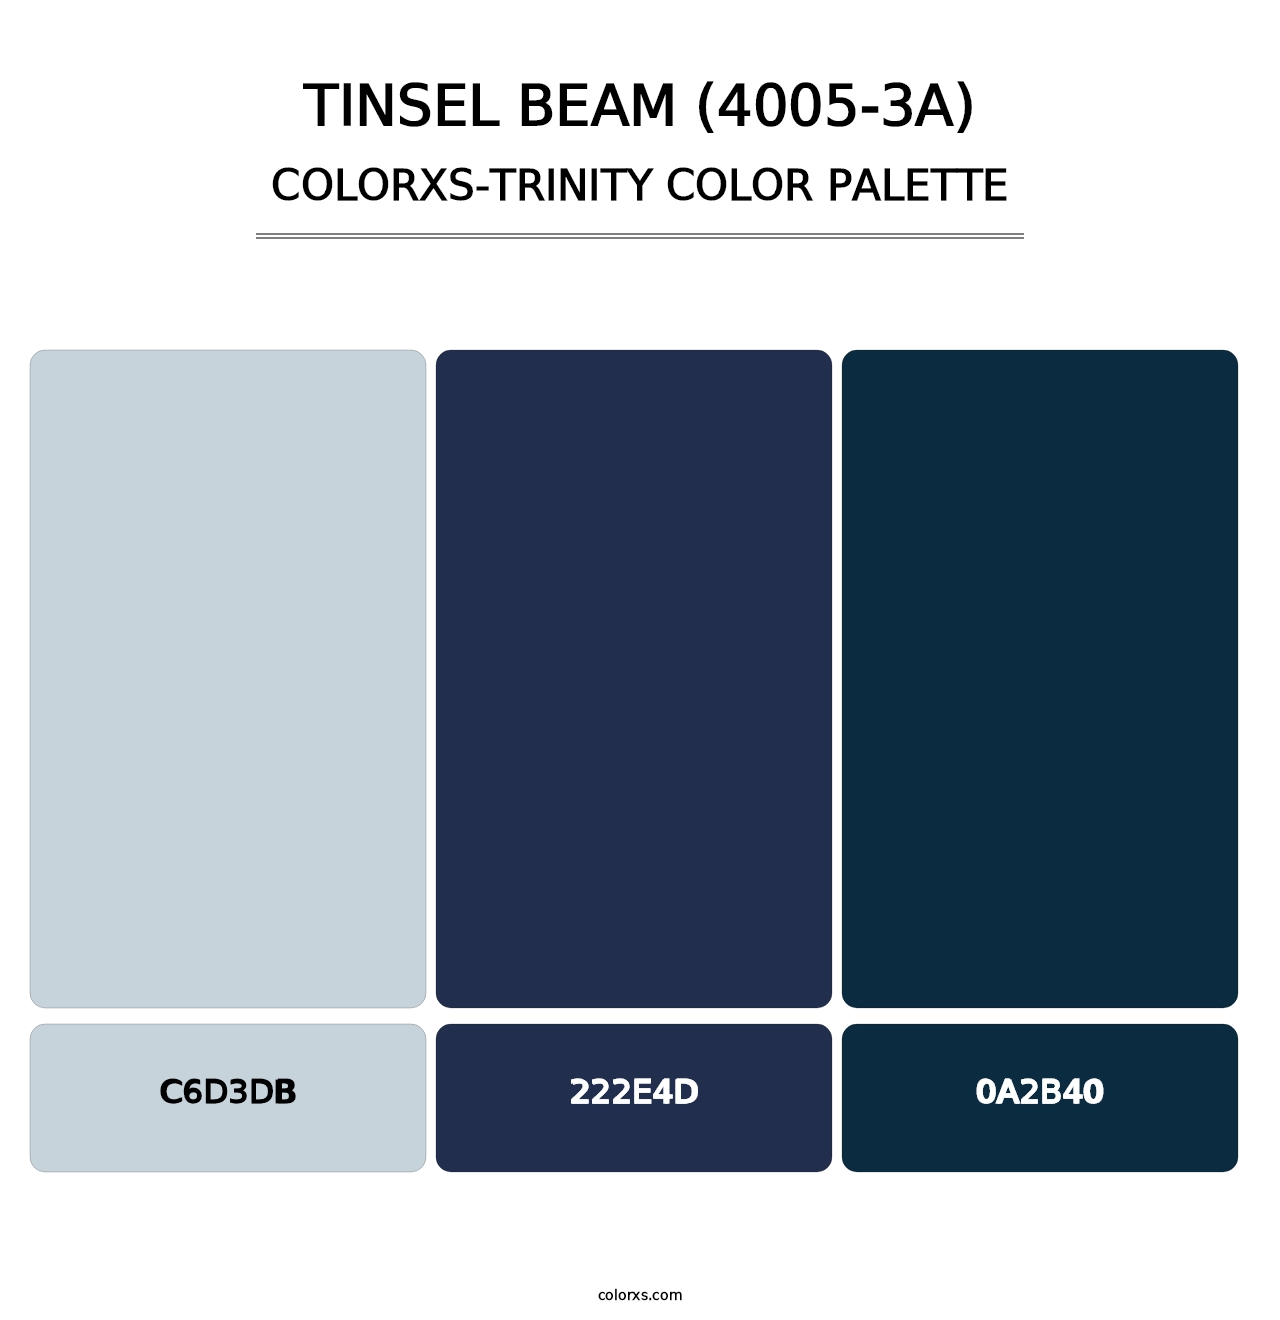 Tinsel Beam (4005-3A) - Colorxs Trinity Palette